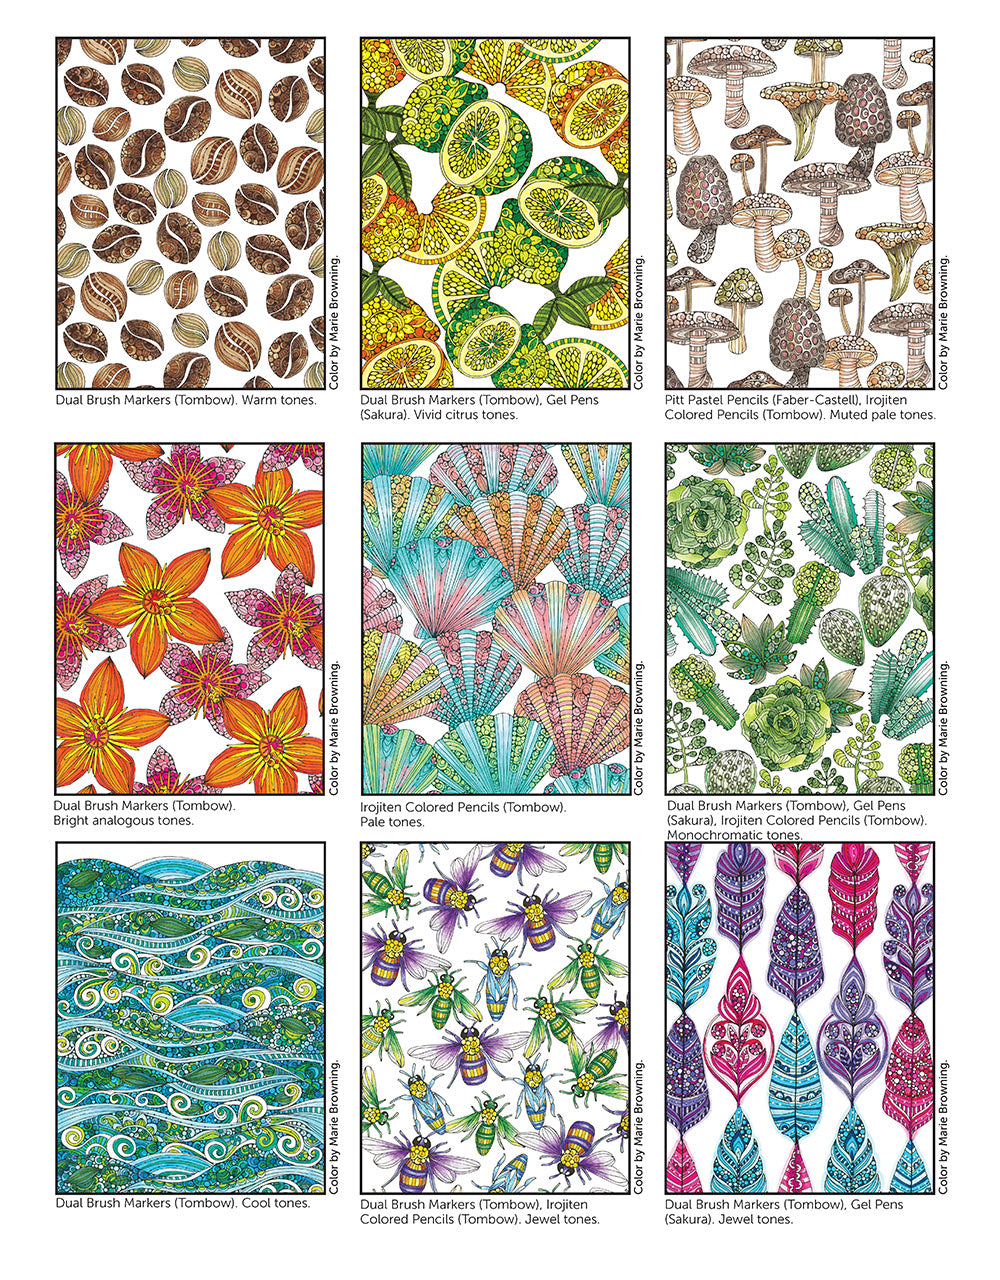 Creative Coloring Patterns of Nature